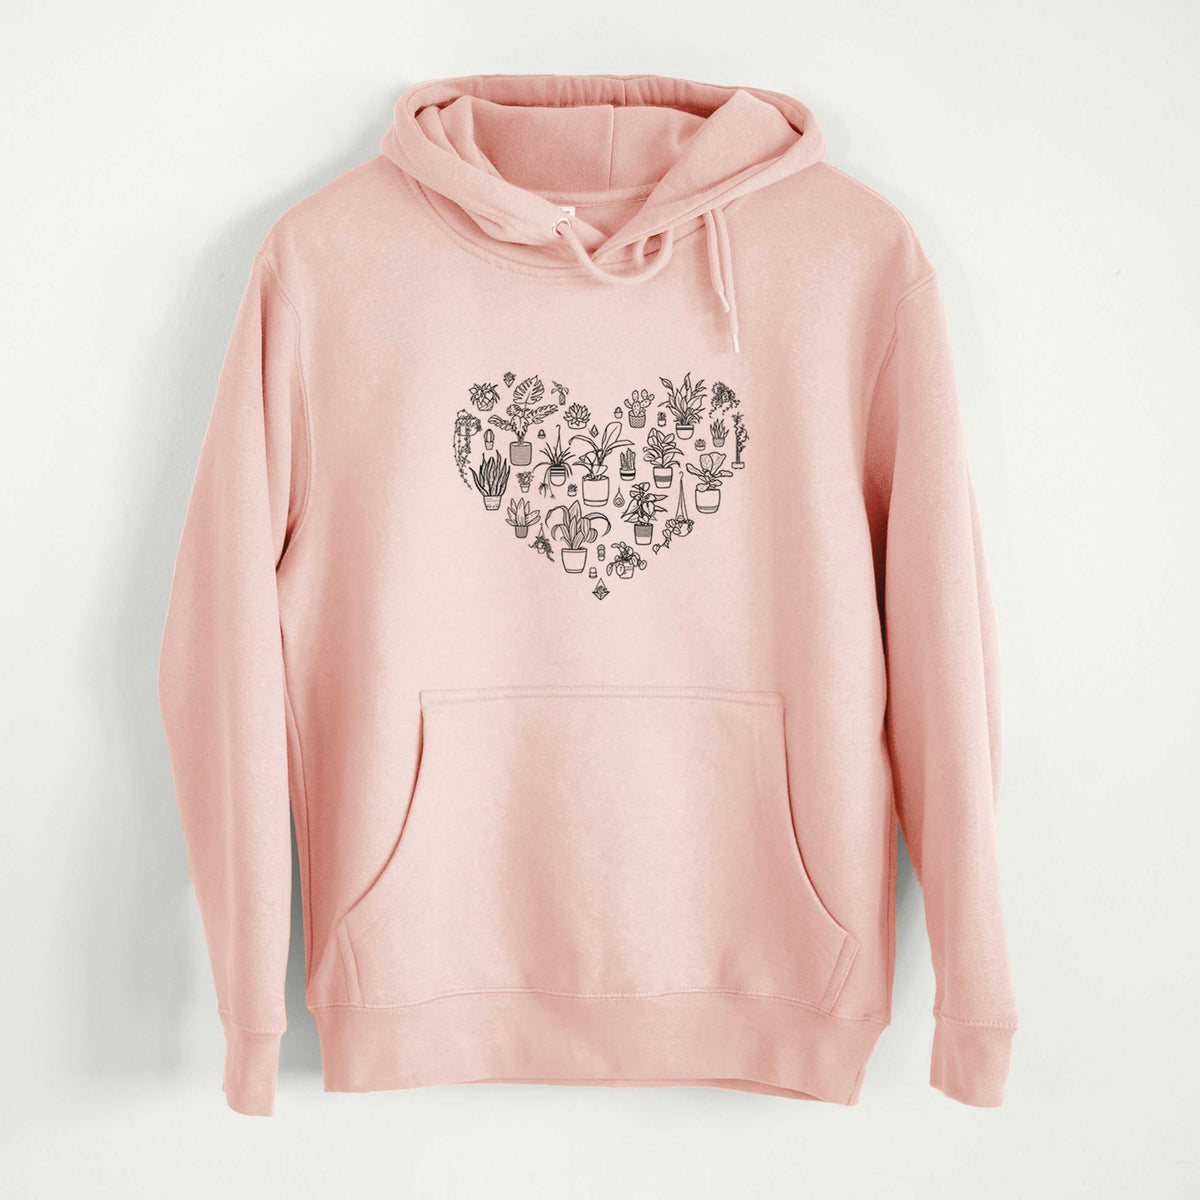 Heart Full of House Plants  - Mid-Weight Unisex Premium Blend Hoodie